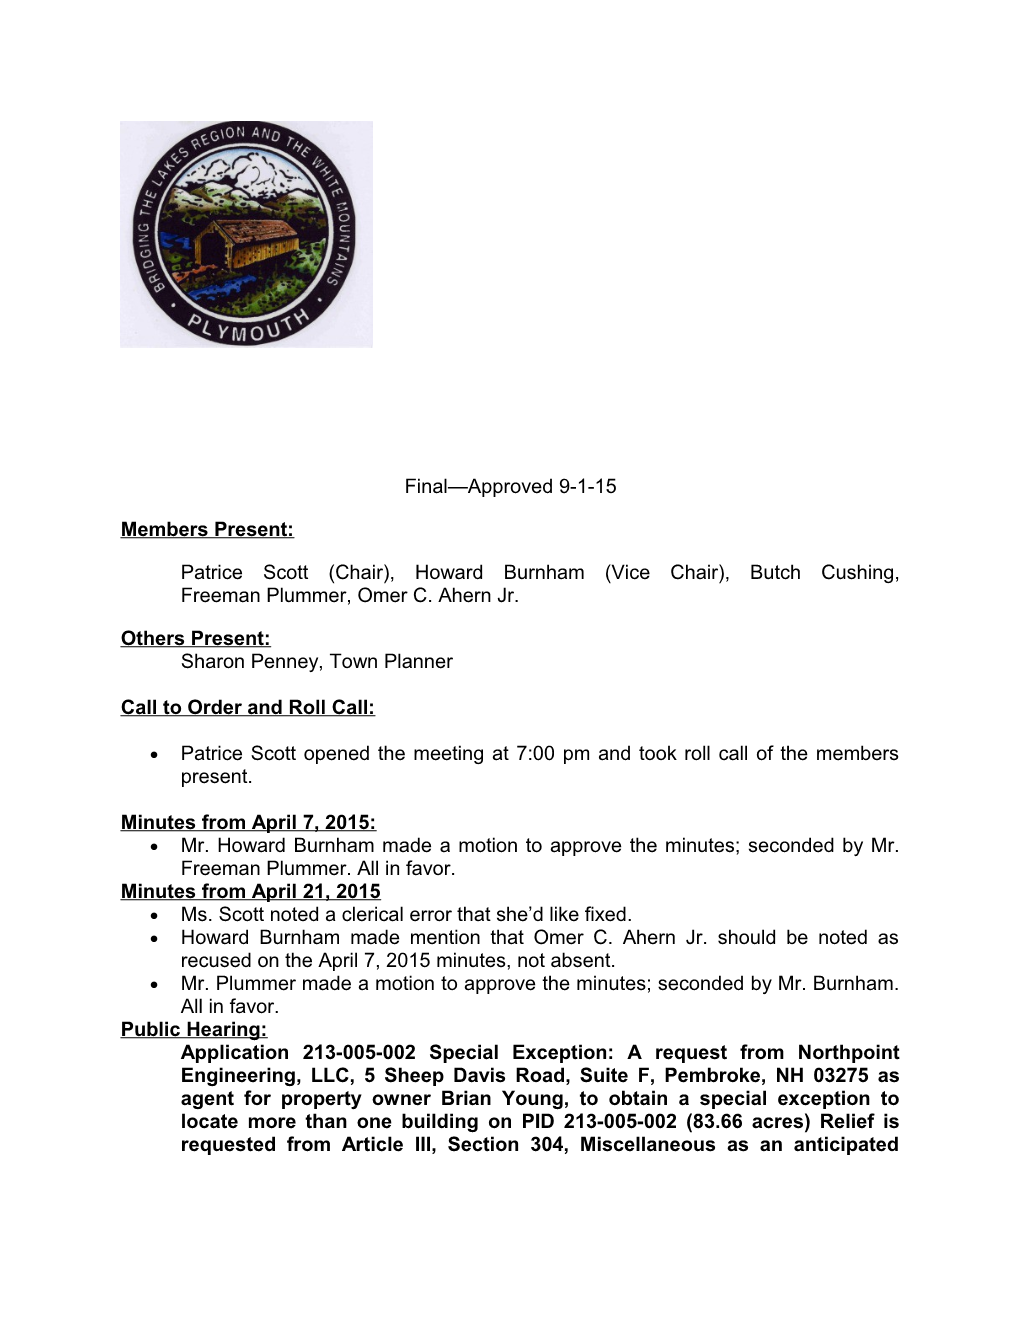 Final Approved 9-1-15